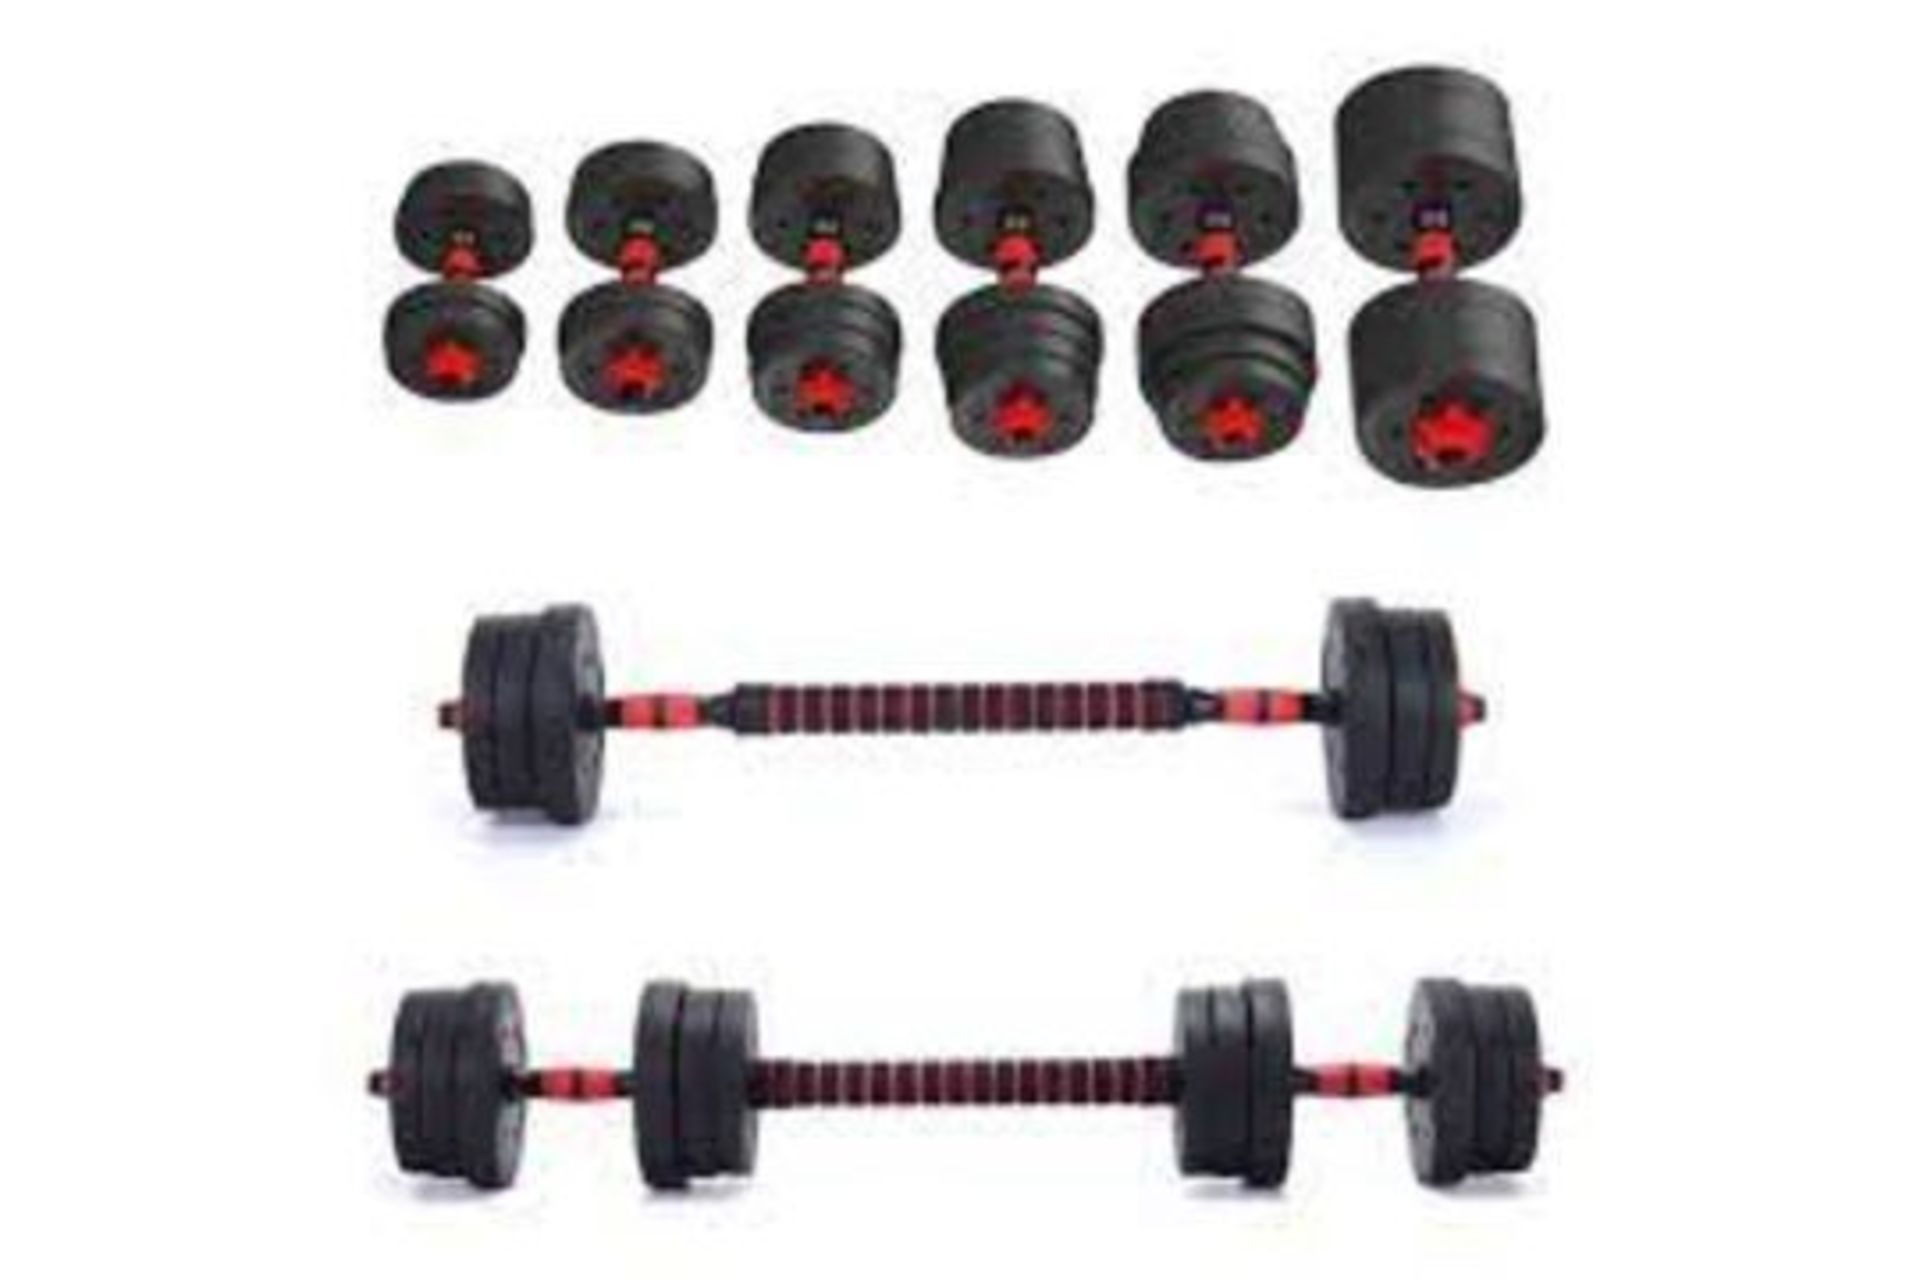 6 X BRAND NEW 10KG DUMBELL BARBELL SETS R15-8